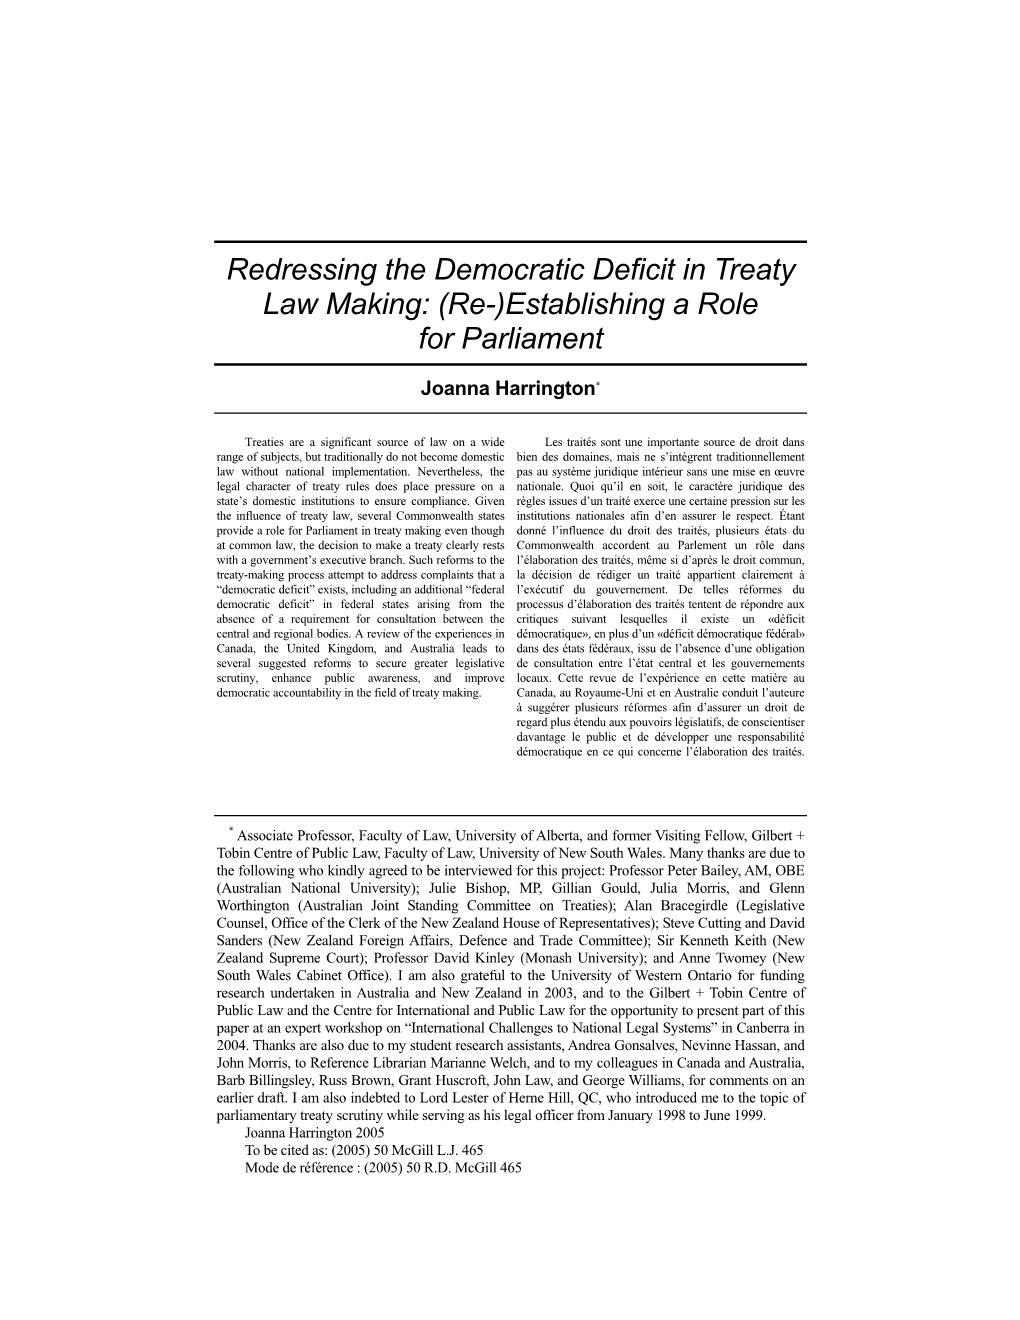 Redressing the Democratic Deficit in Treaty Law Making: (Re-)Establishing a Role for Parliament